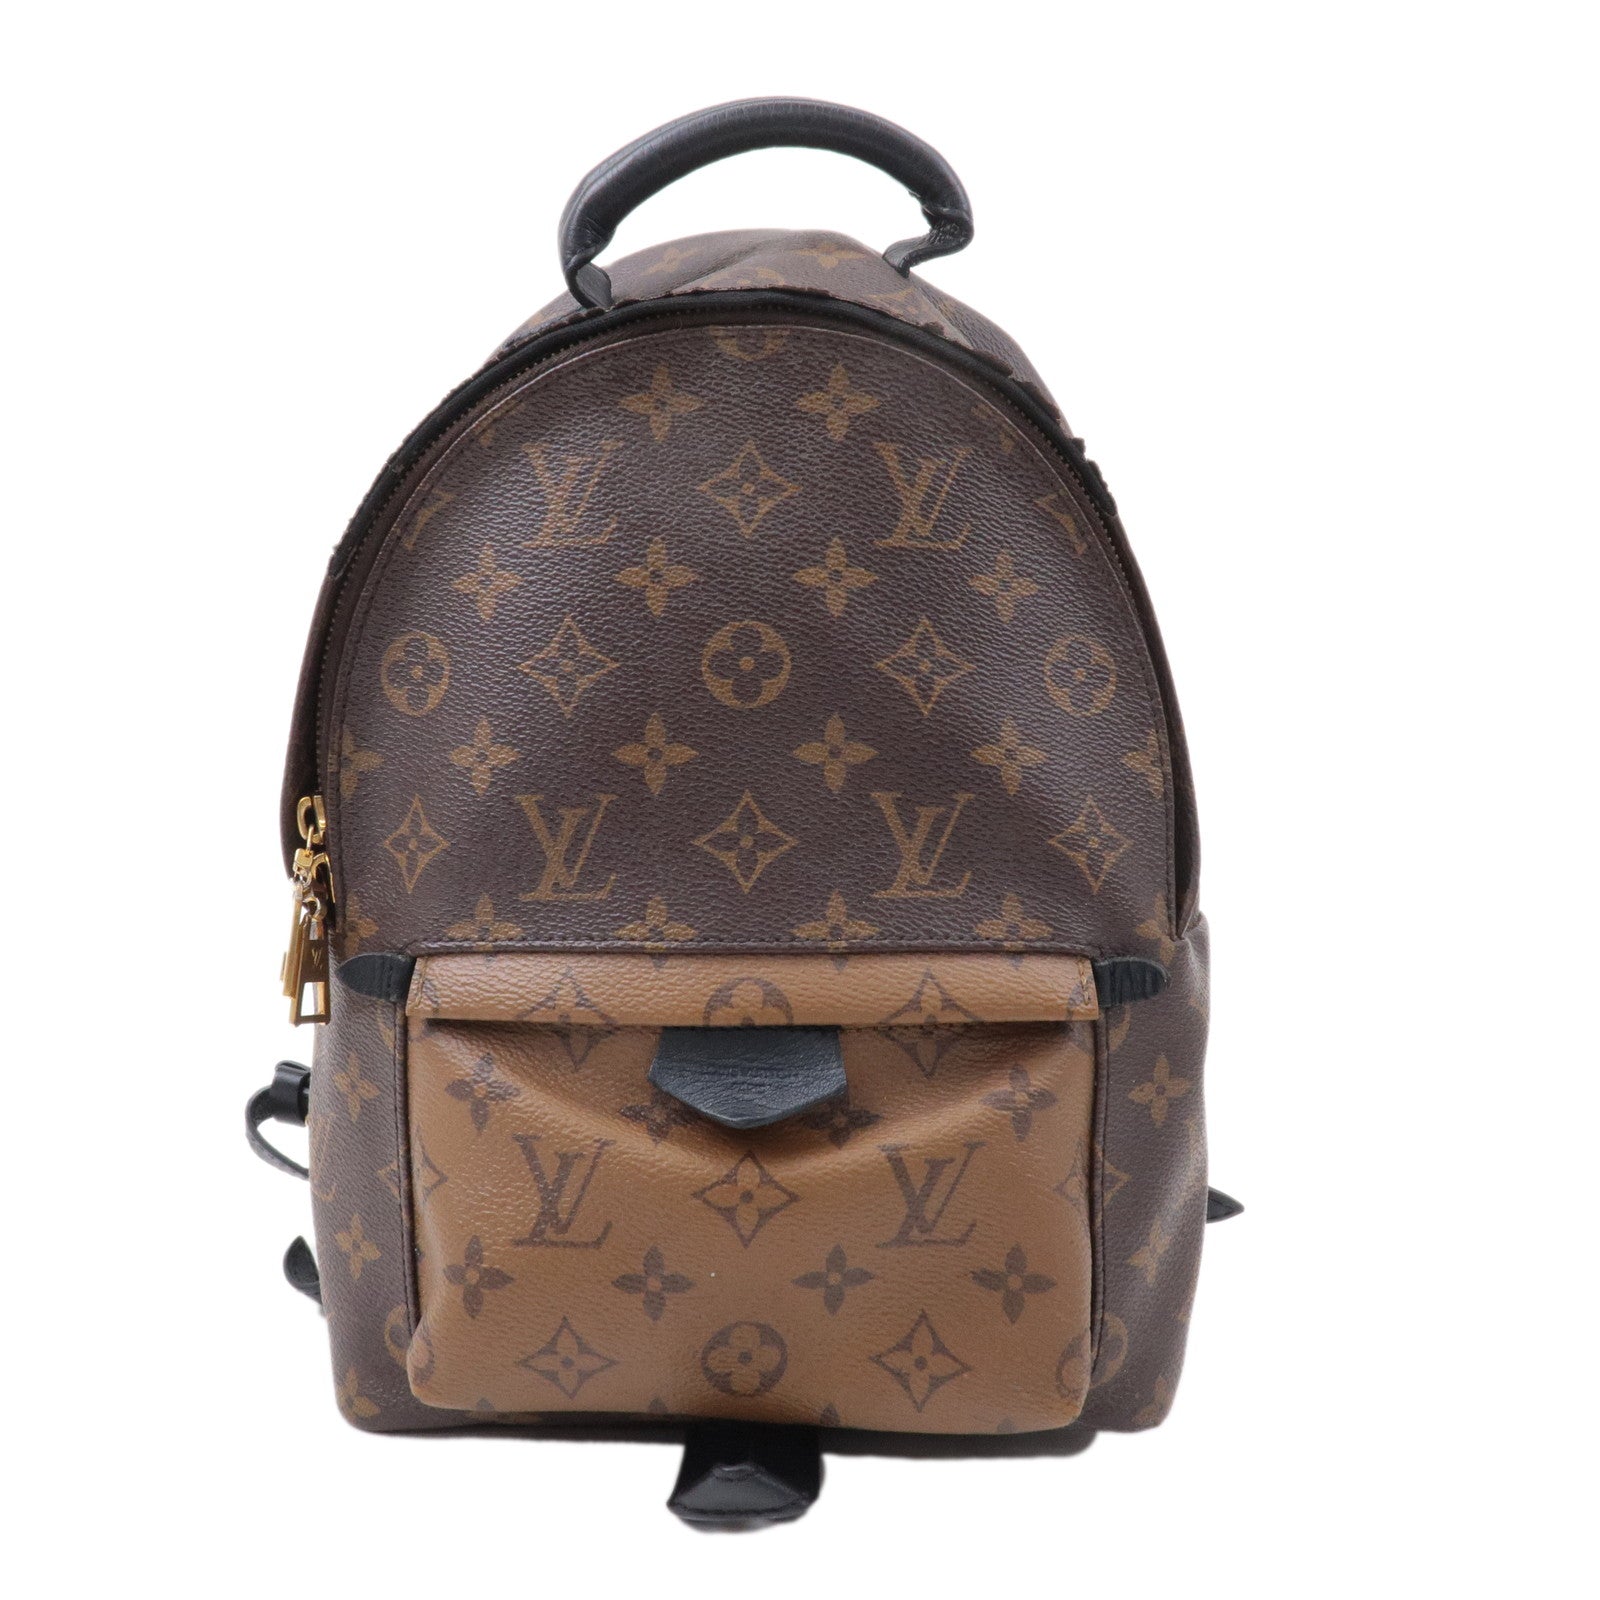 Preloved Authentic Louis Vuitton Monogram Reverse Palm Springs Backpack PM